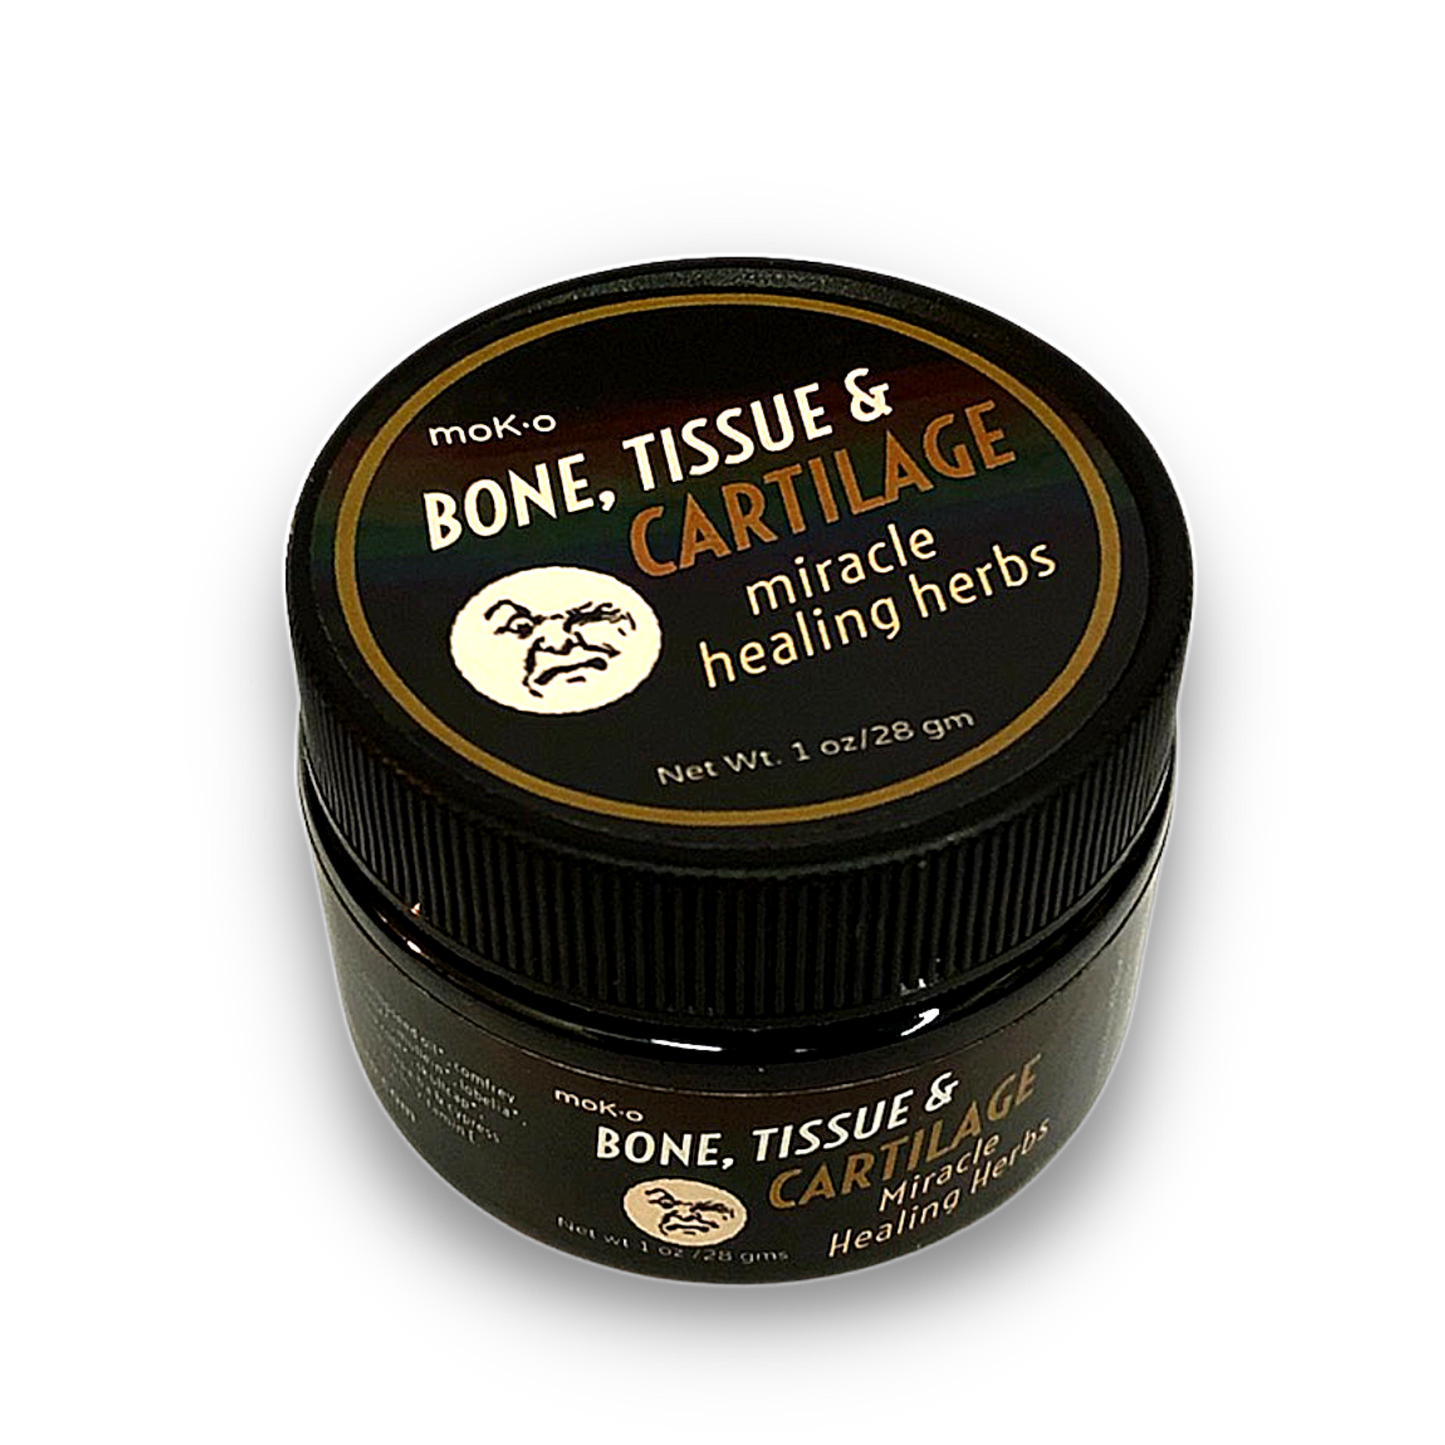 Bone, Tissue & Cartilage balm herbal infusion. Healing herbs for sprains, bruises and ligament damage 